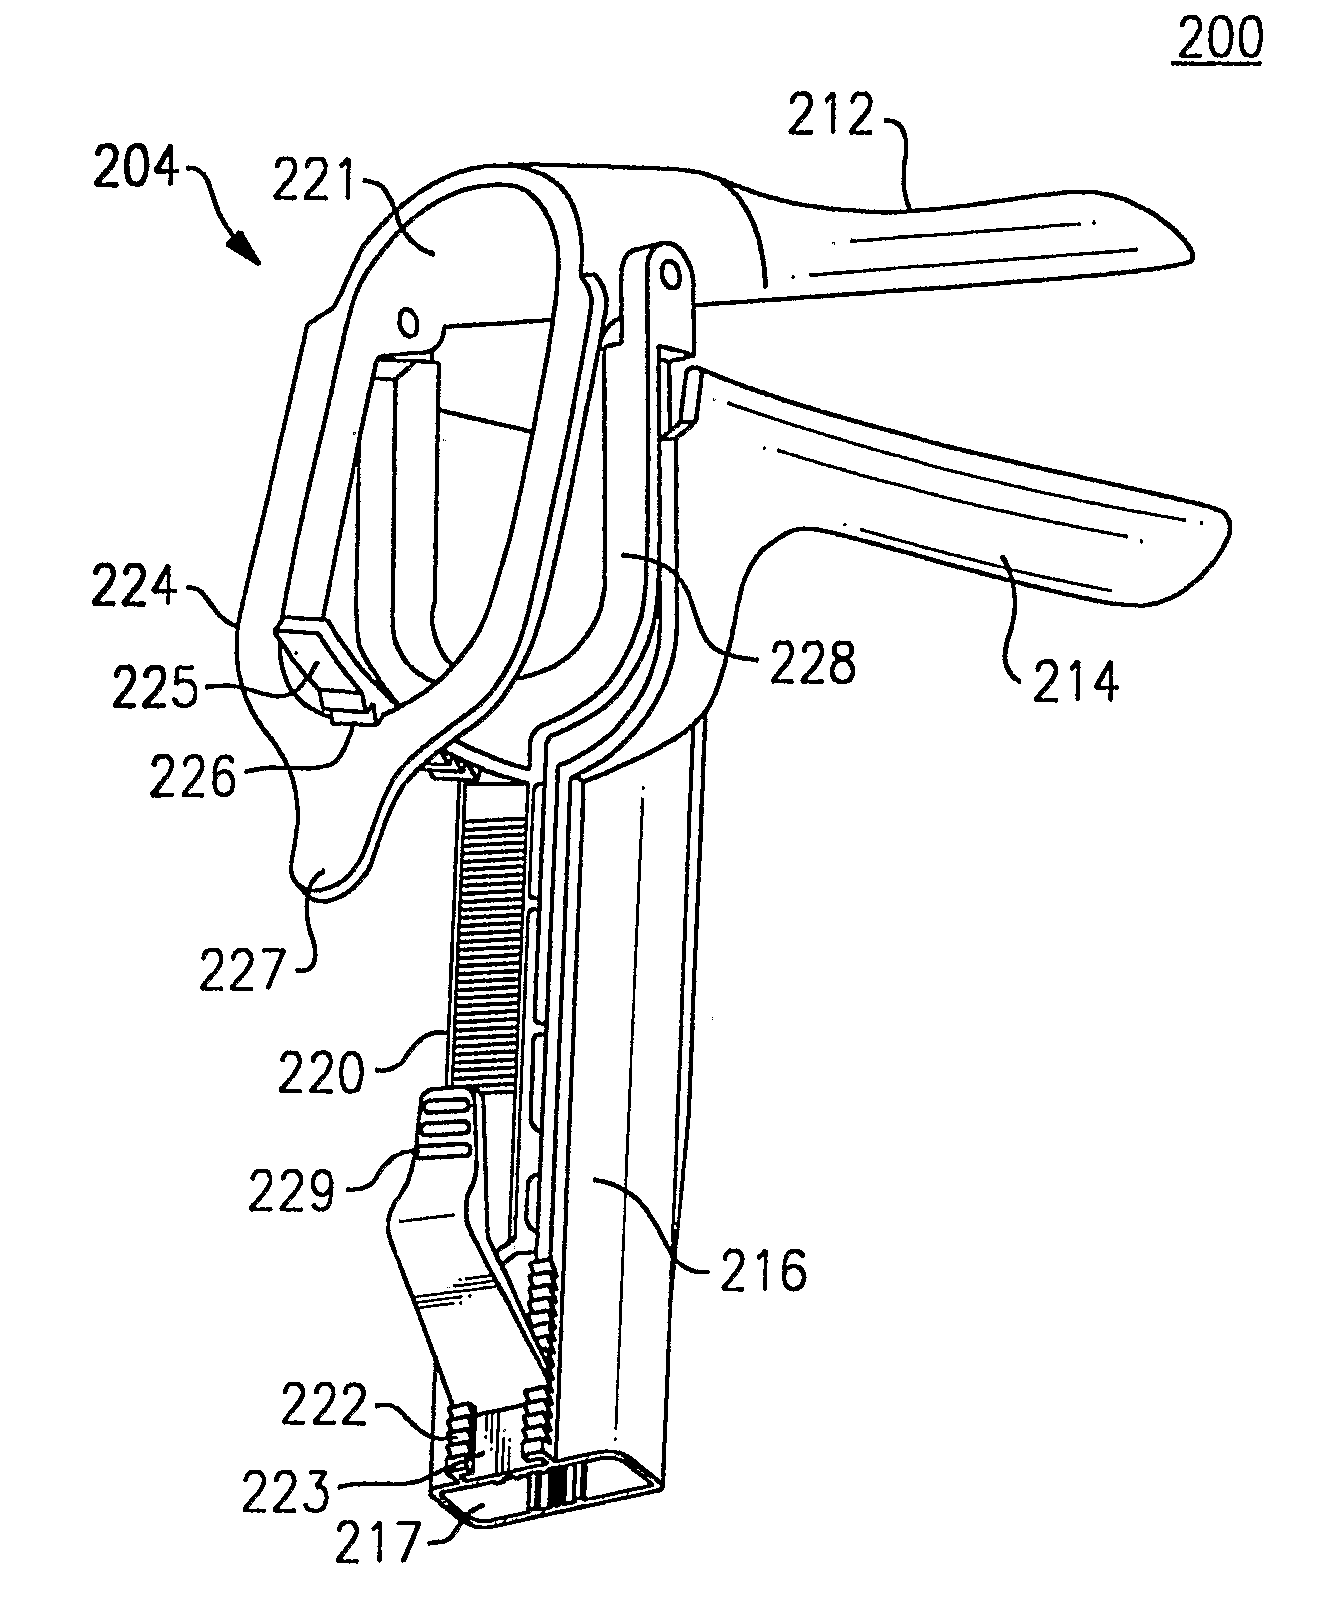 Illumination Assembly For Use With Vaginal Speculum Apparatus